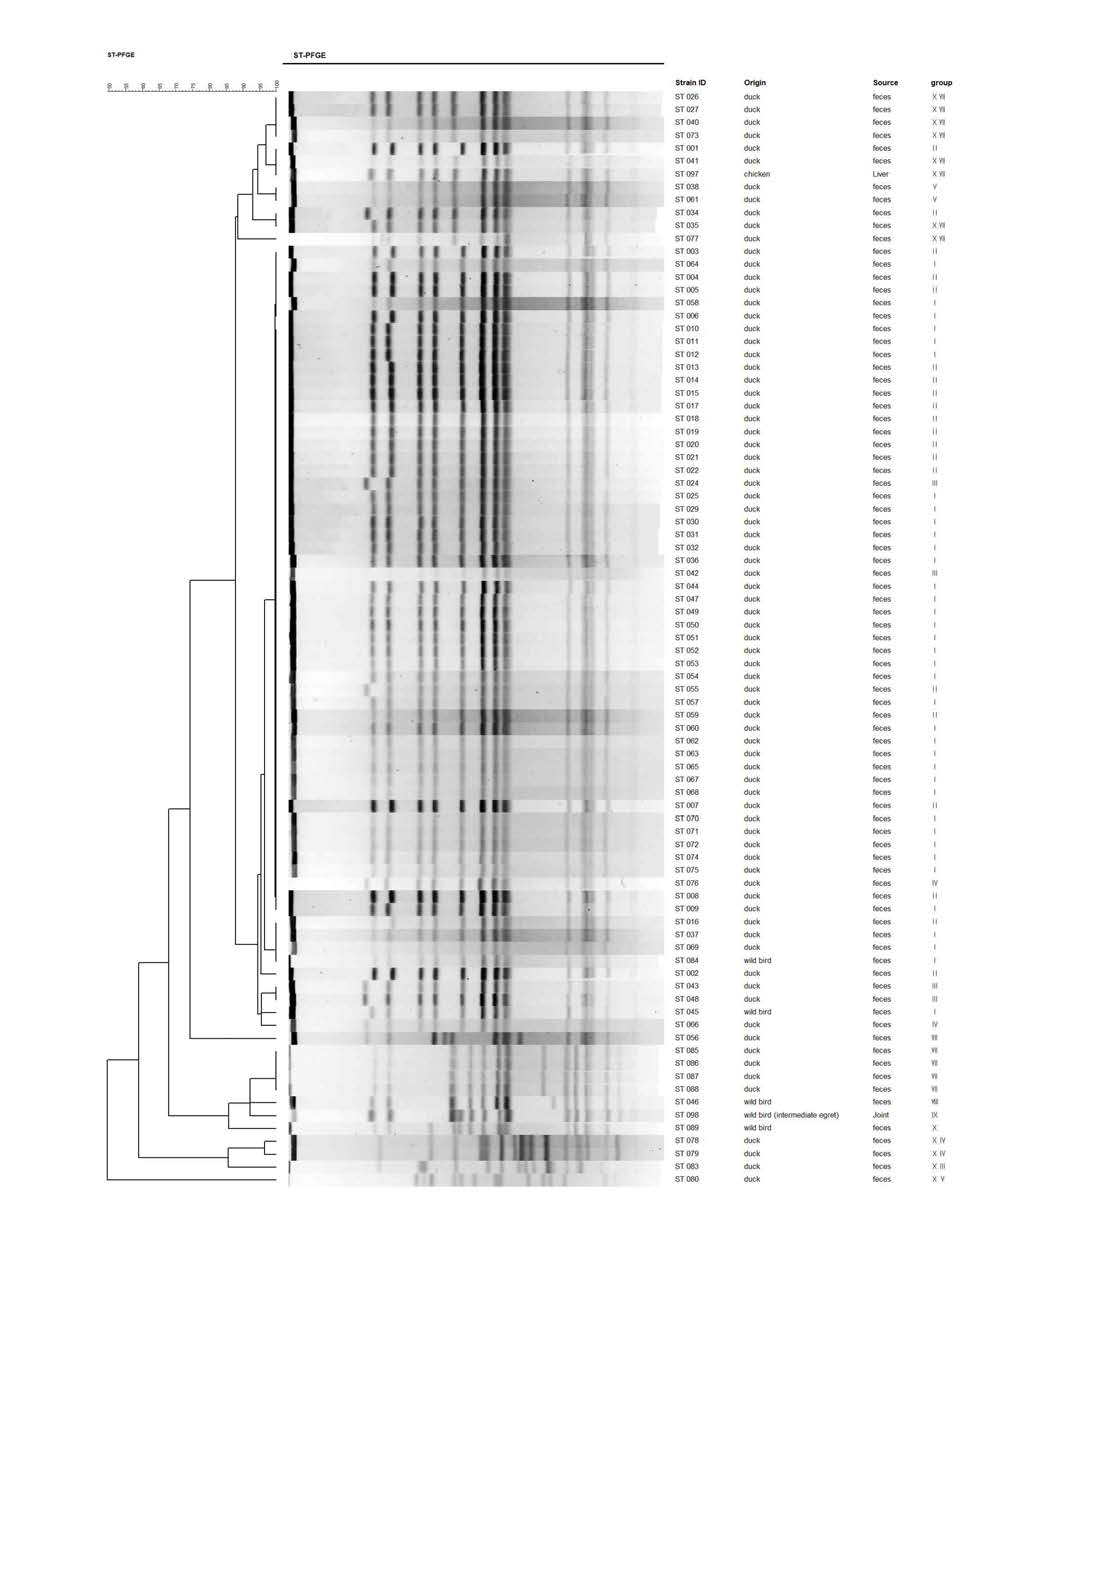 Dendrogram of PFGE types obtained by XbaI-PFGE of 85 Salmonella